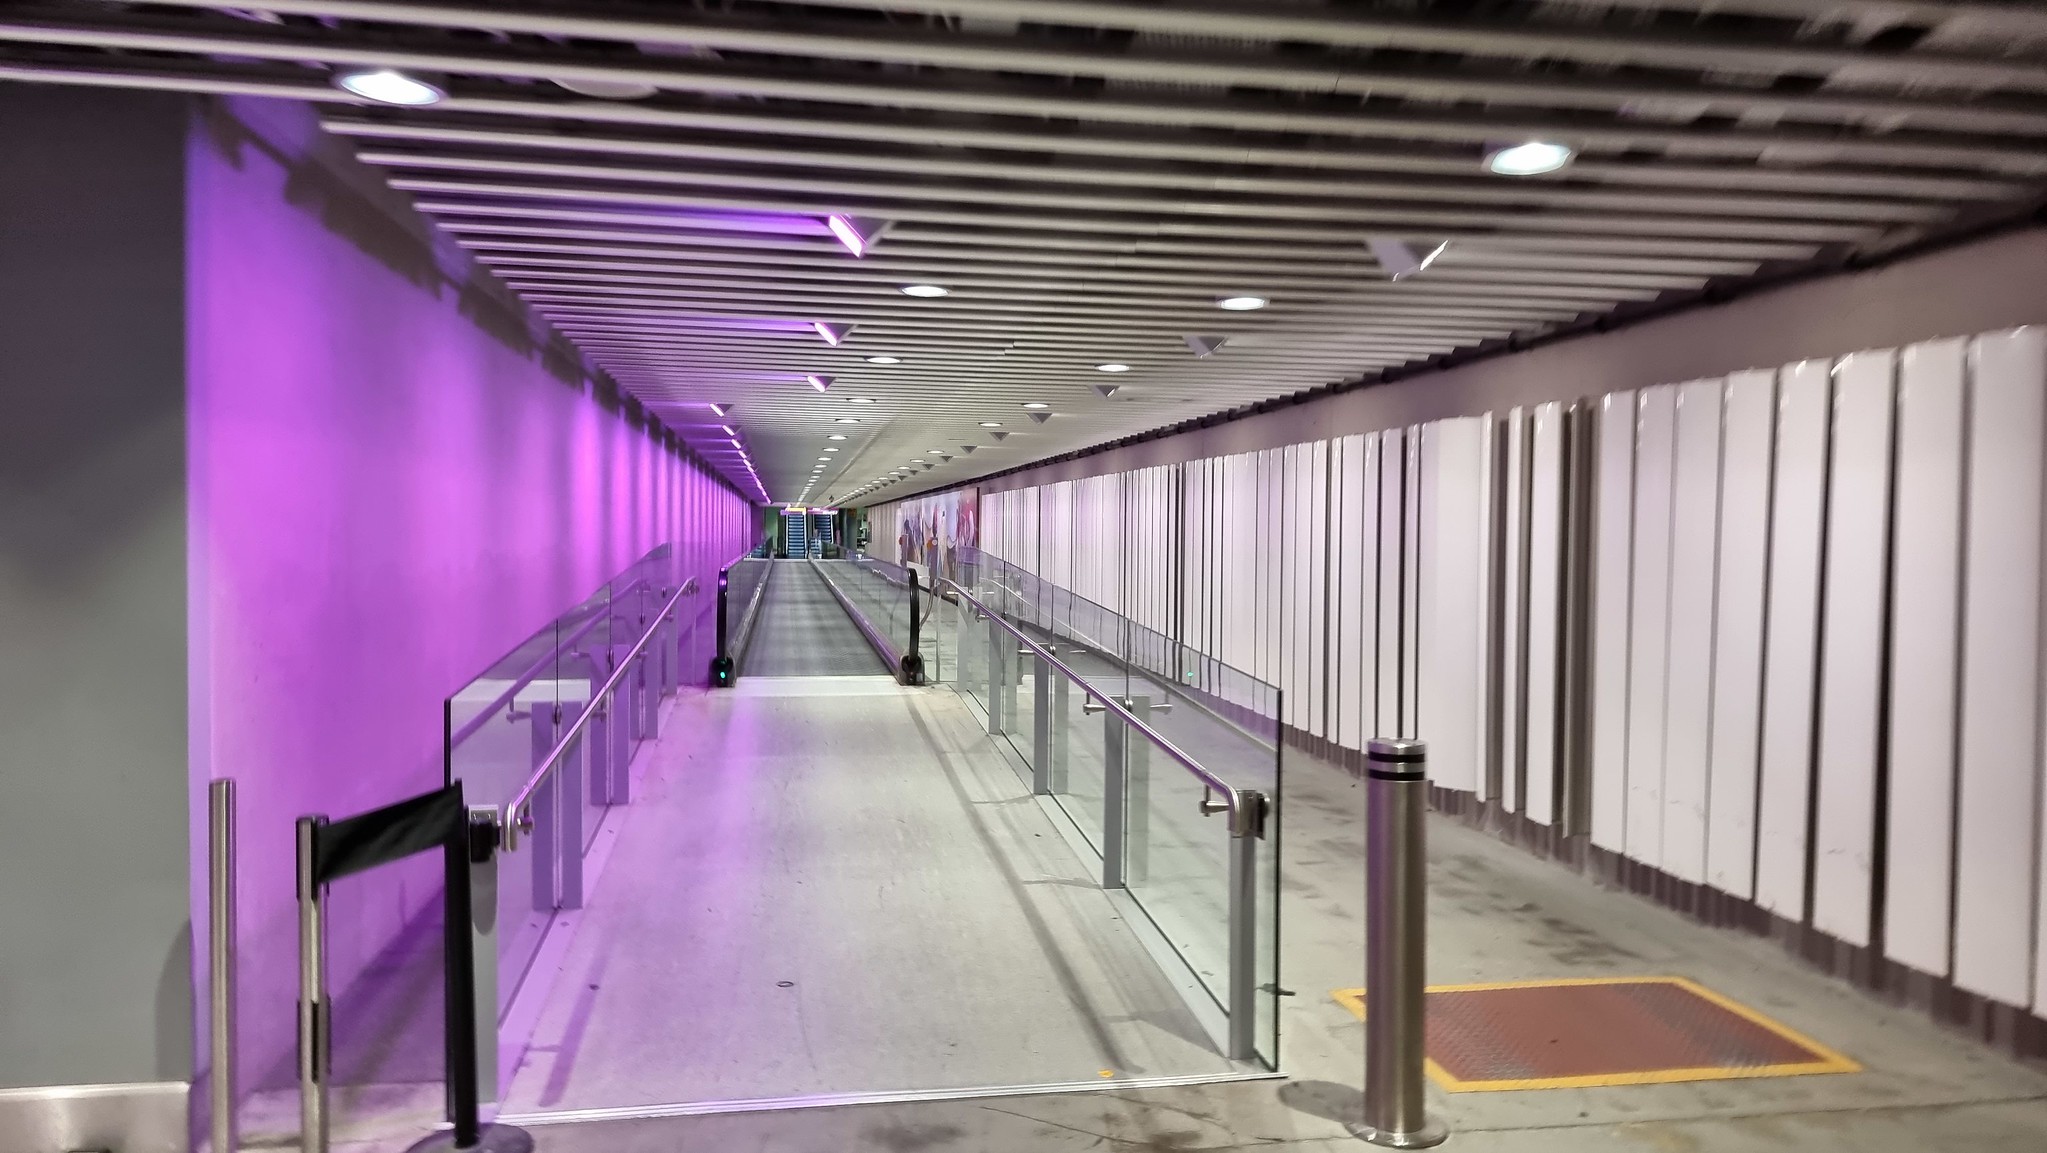 The Transit Walkway which allowed me to walk back to Arrivals at Heathrow T5